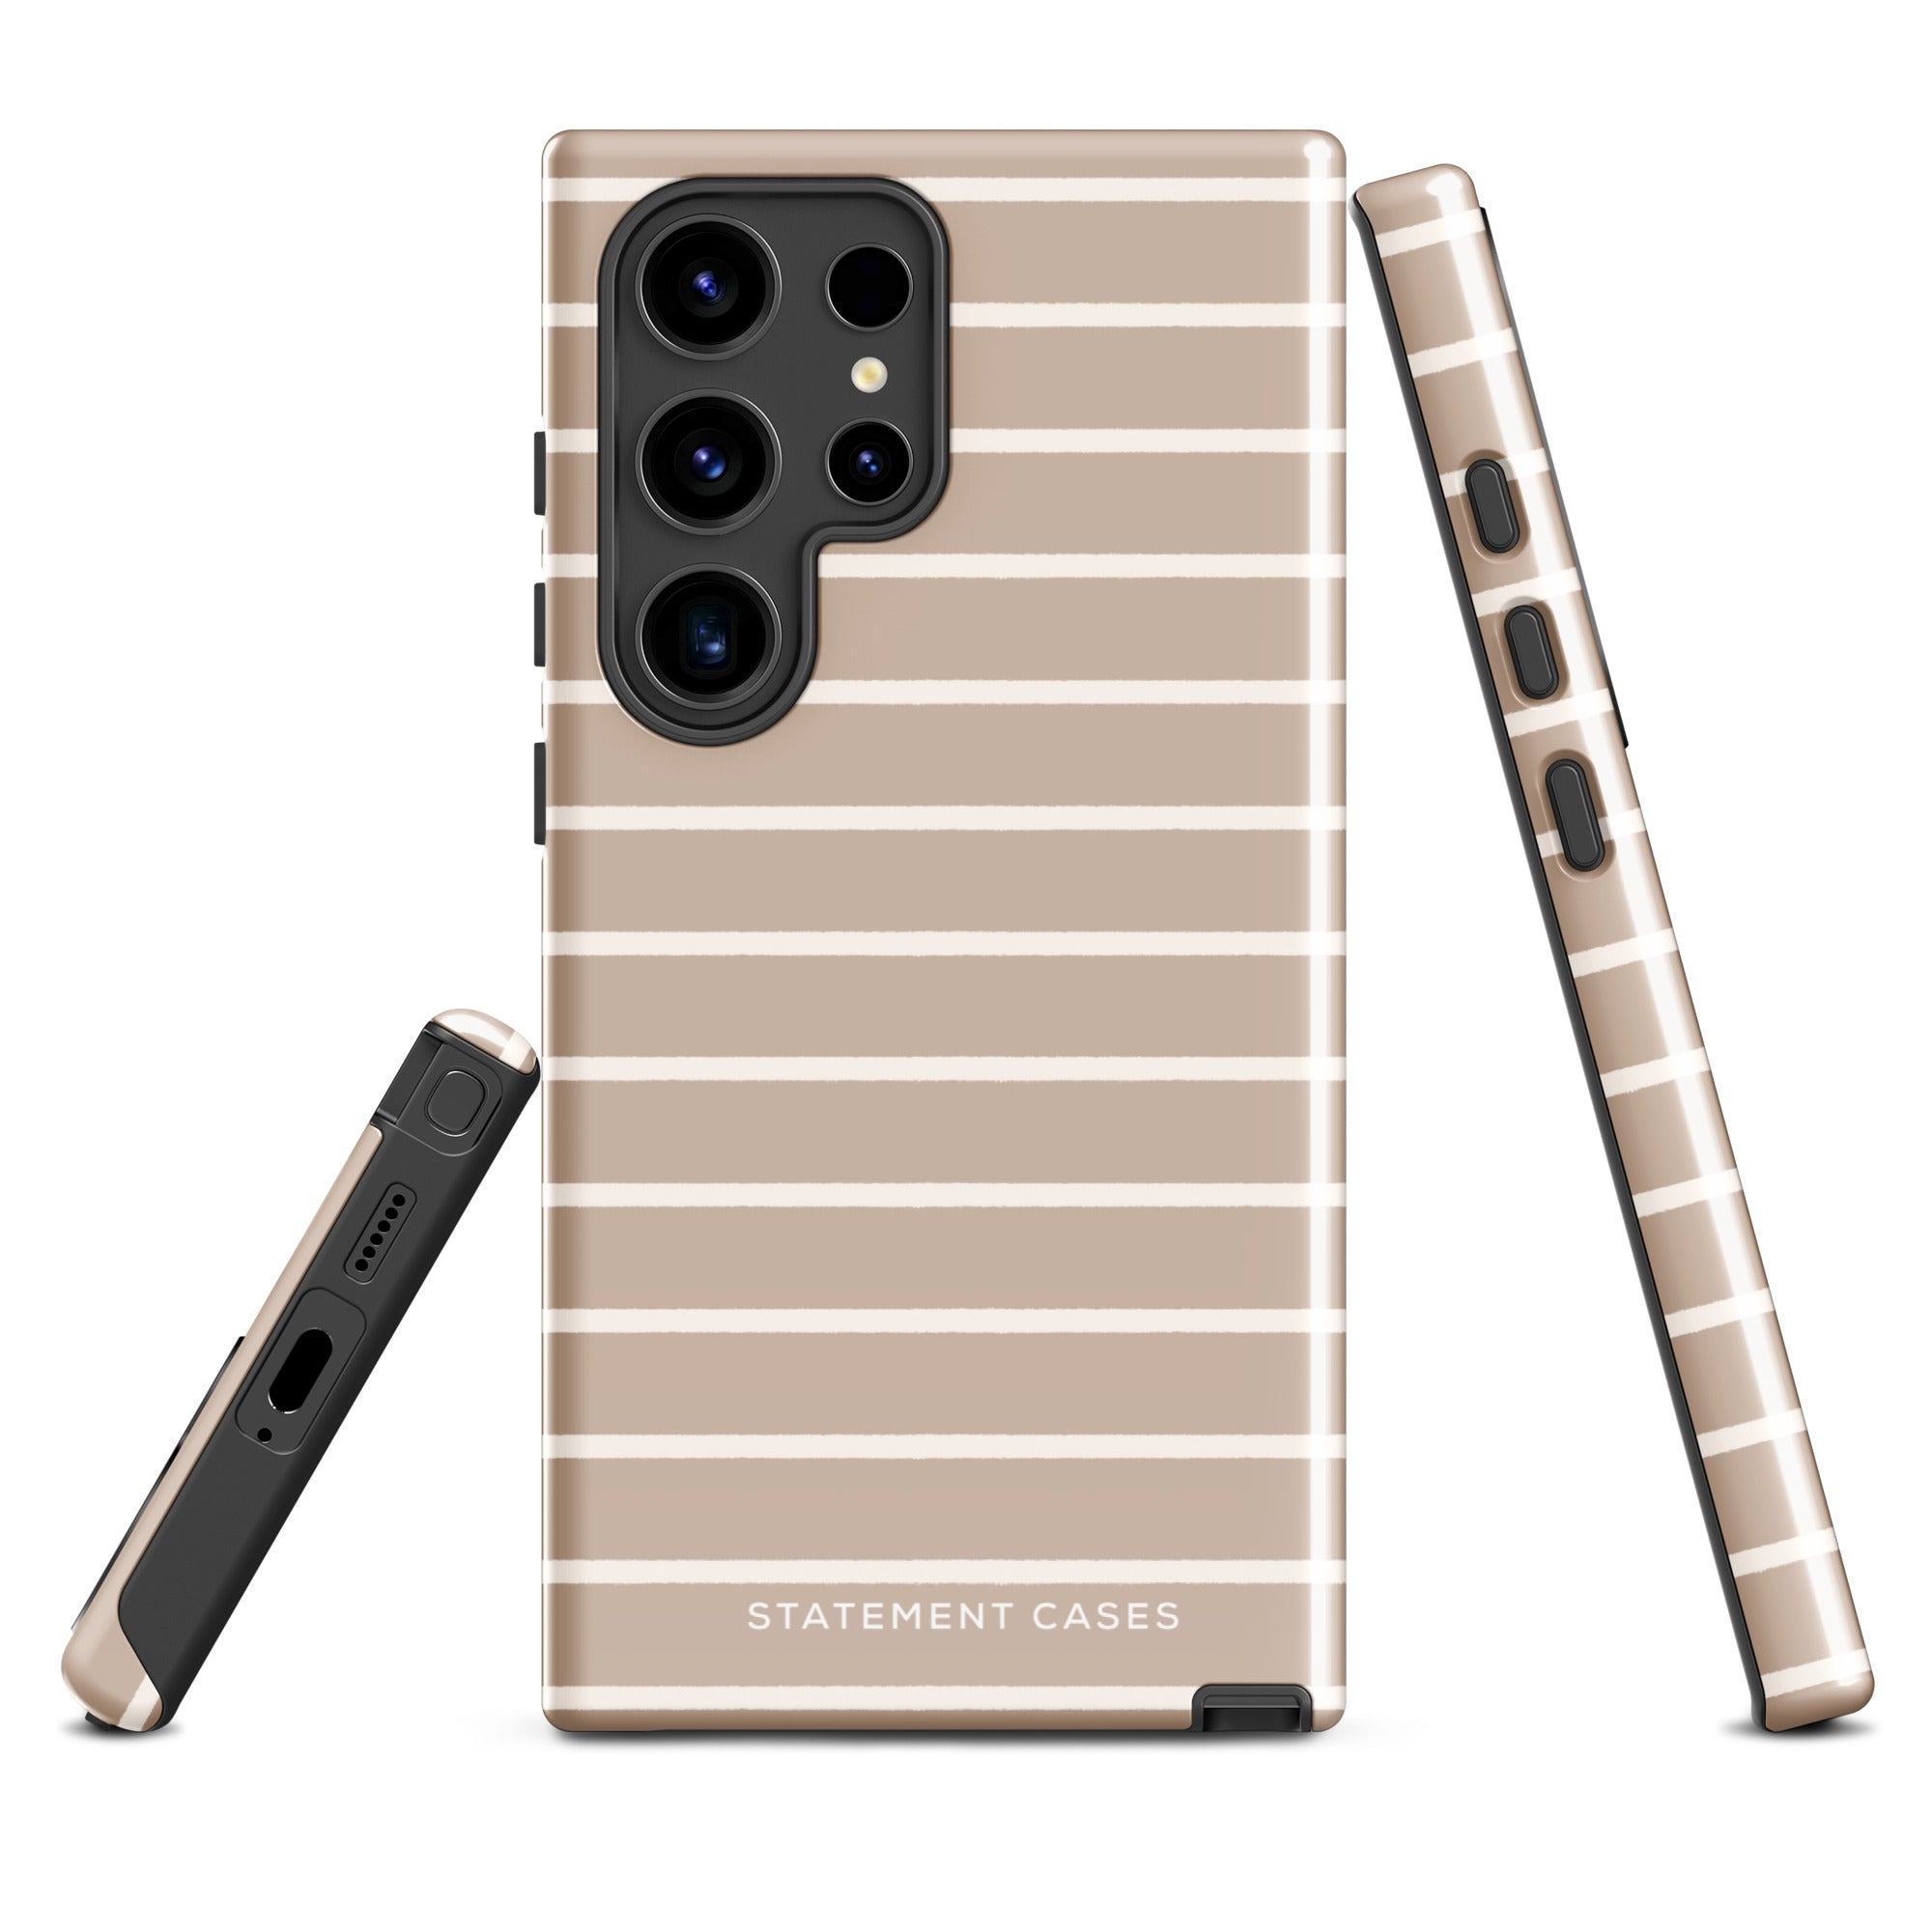 Three perspectives of a beige phone case with white horizontal stripes. Shown from the back, side, and bottom angles, this impact-resistant "Au Naturale for Samsung" case by Statement Cases features the text "Statement Cases" at the bottom. Its dual-layer design ensures shock-absorbing protection with cutouts for the camera, buttons, and port.